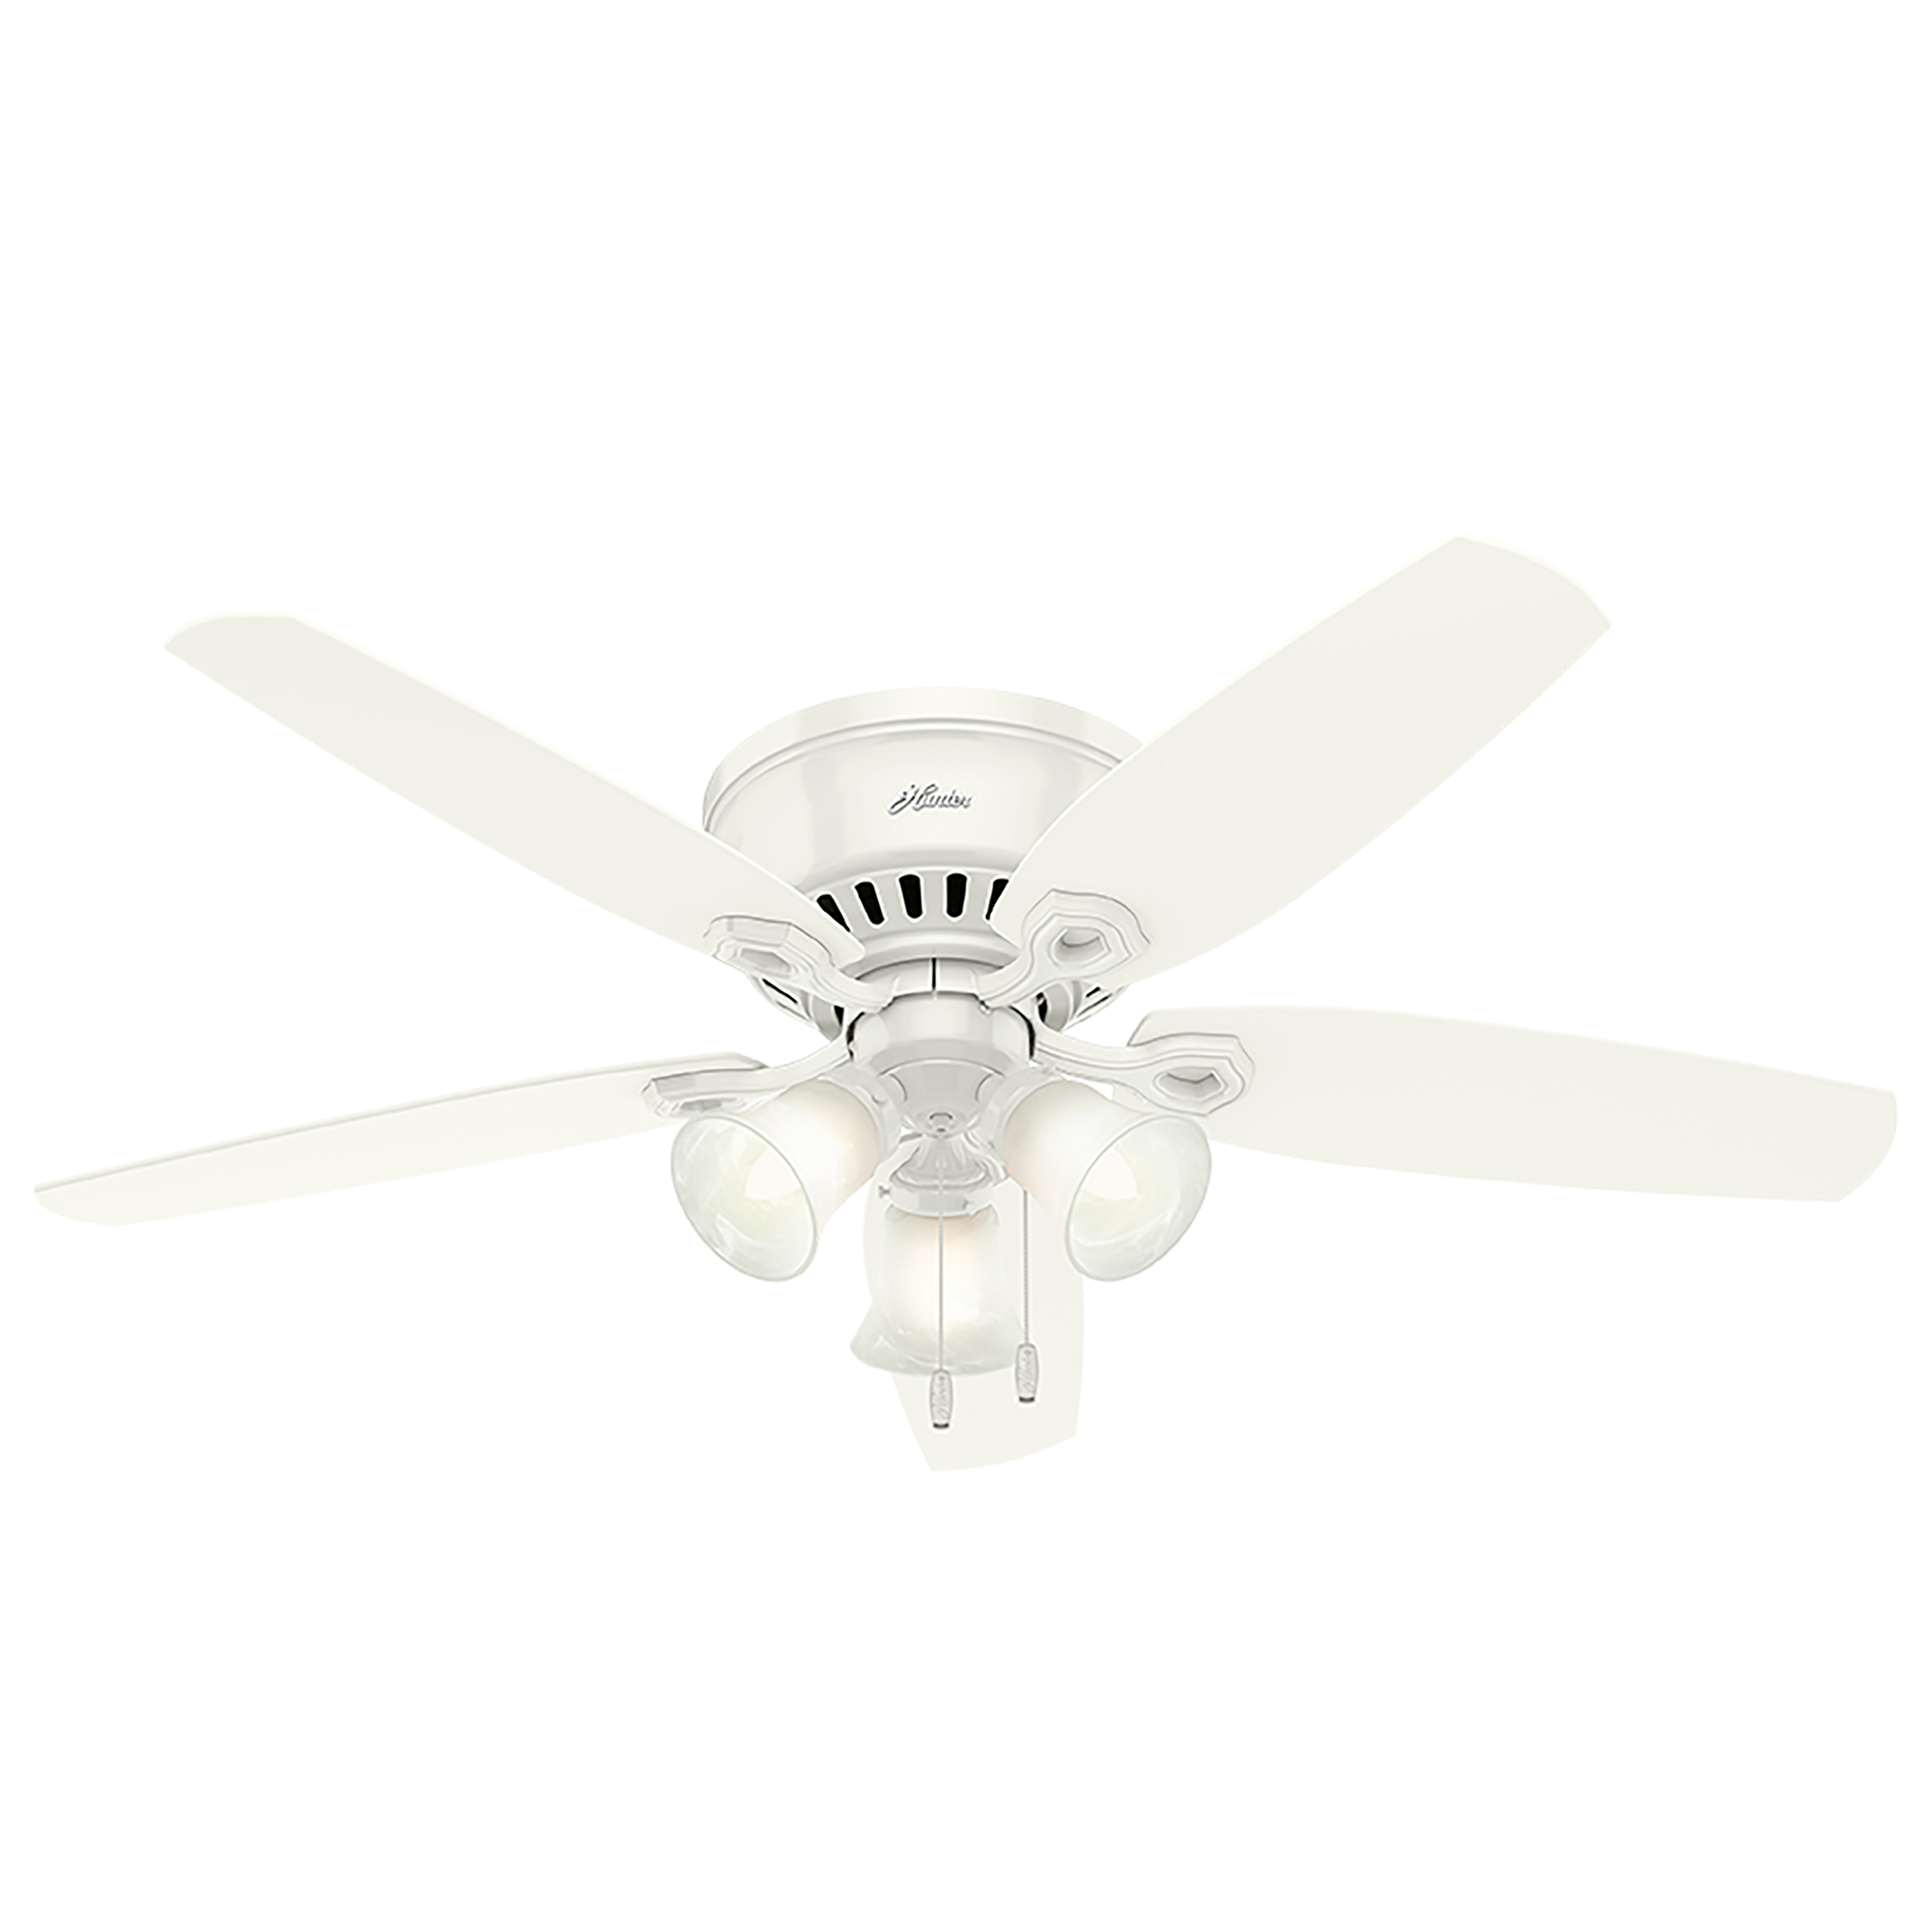 Hunter 52 inch Builder Low Profile Ceiling Fan with LED Light Kit and Pull Chain